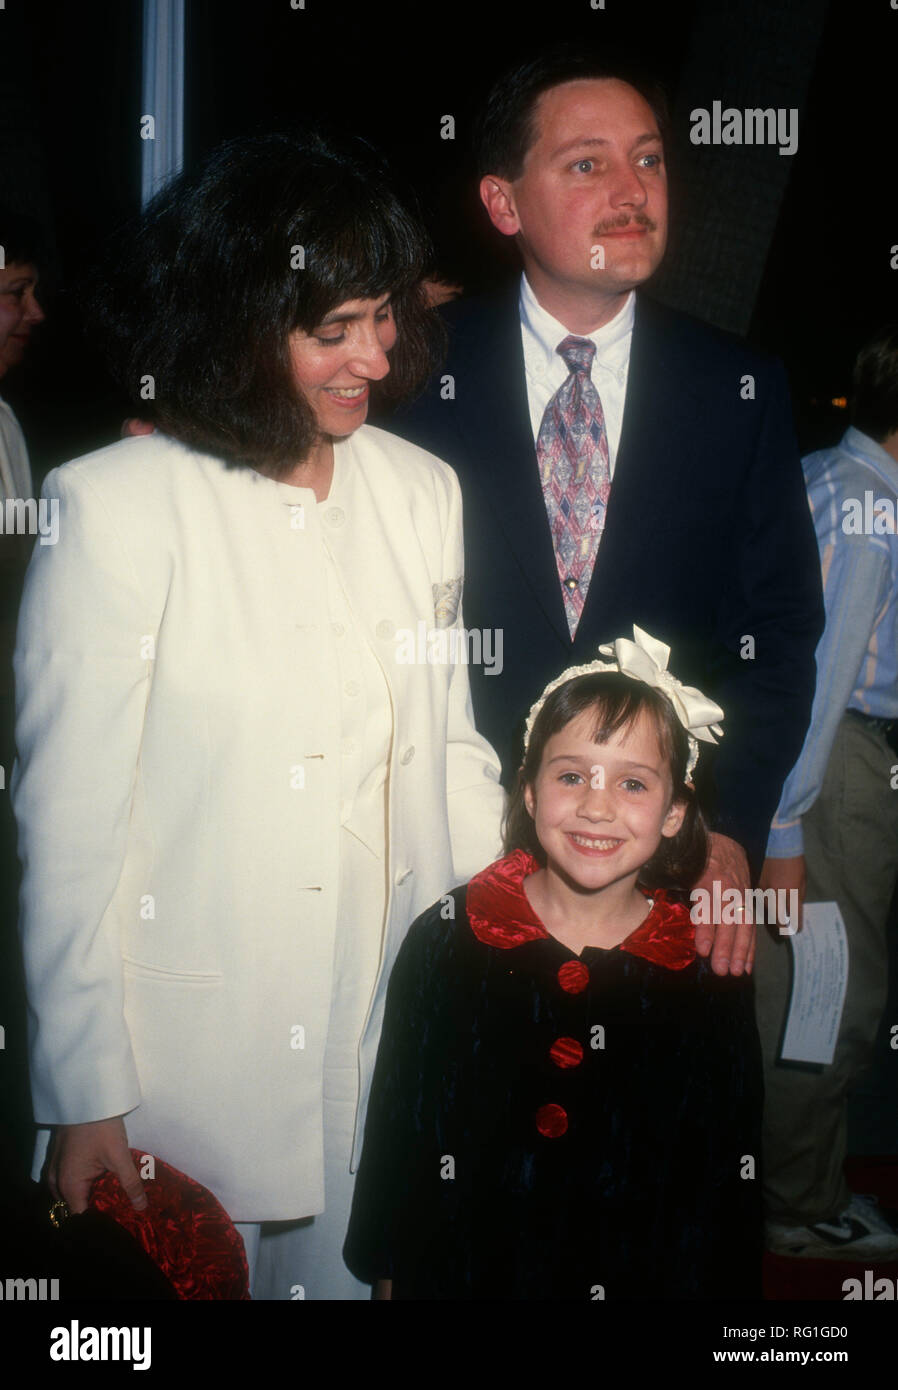 BEVERLY HILLS, CA - NOVEMBER 22: Actress Mara Wilson, mother Suzie Shapiro and father Michael Wilson attend 20th Century Fox's' 'Mrs. Doubtfire' Premiere on November 22, 1993 at The Academy of Motion Picture Arts & Sciences in Beverly Hills, California. Photo by Barry King/Alamy Stock Photo Stock Photo